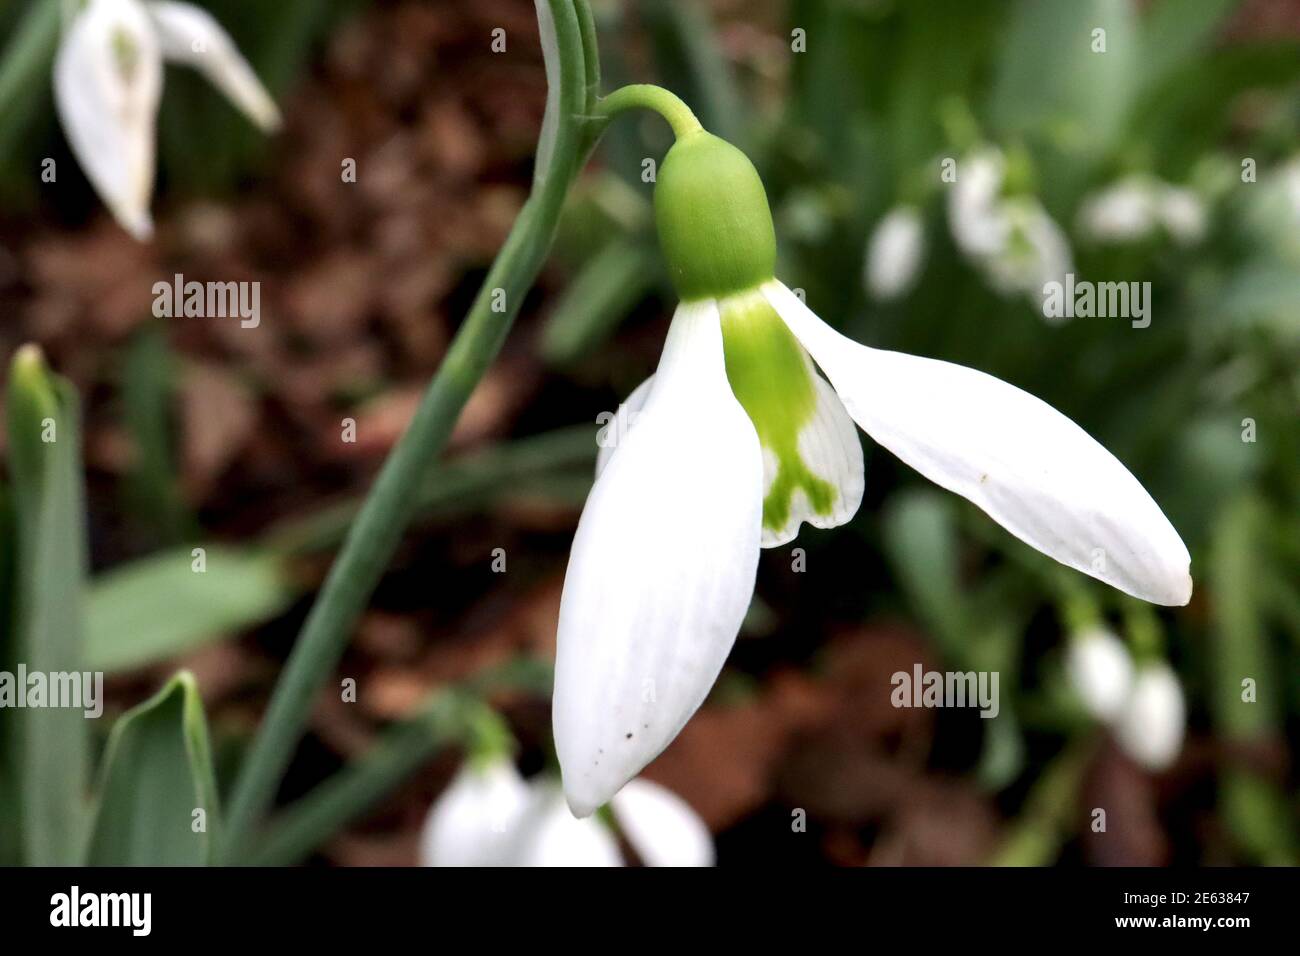 Galanthus plicatus subsp. plicatus ‘Three Ships’ Snowdrop Three Ships – white bell-shaped flowers with two green markings merged, January, England, UK Stock Photo